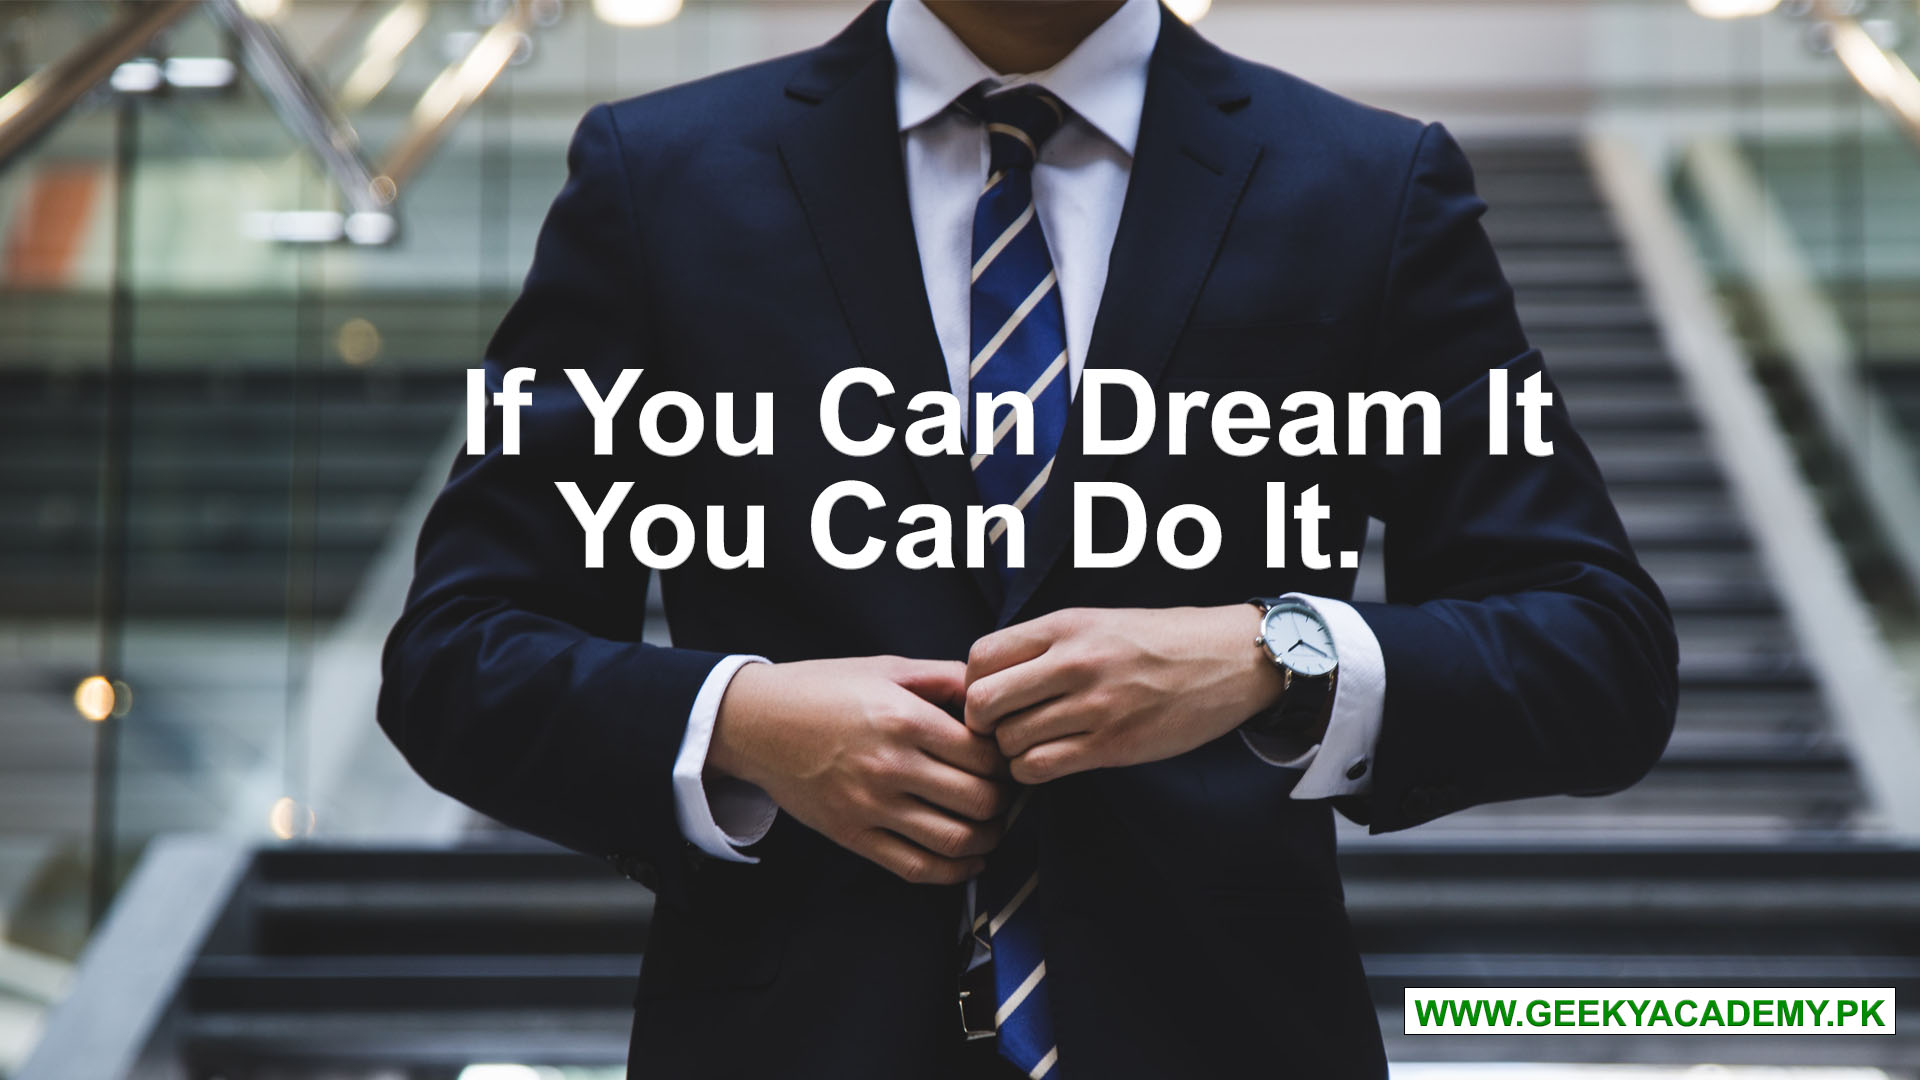 motivational quotes - If You Can Dream It You Can Do It